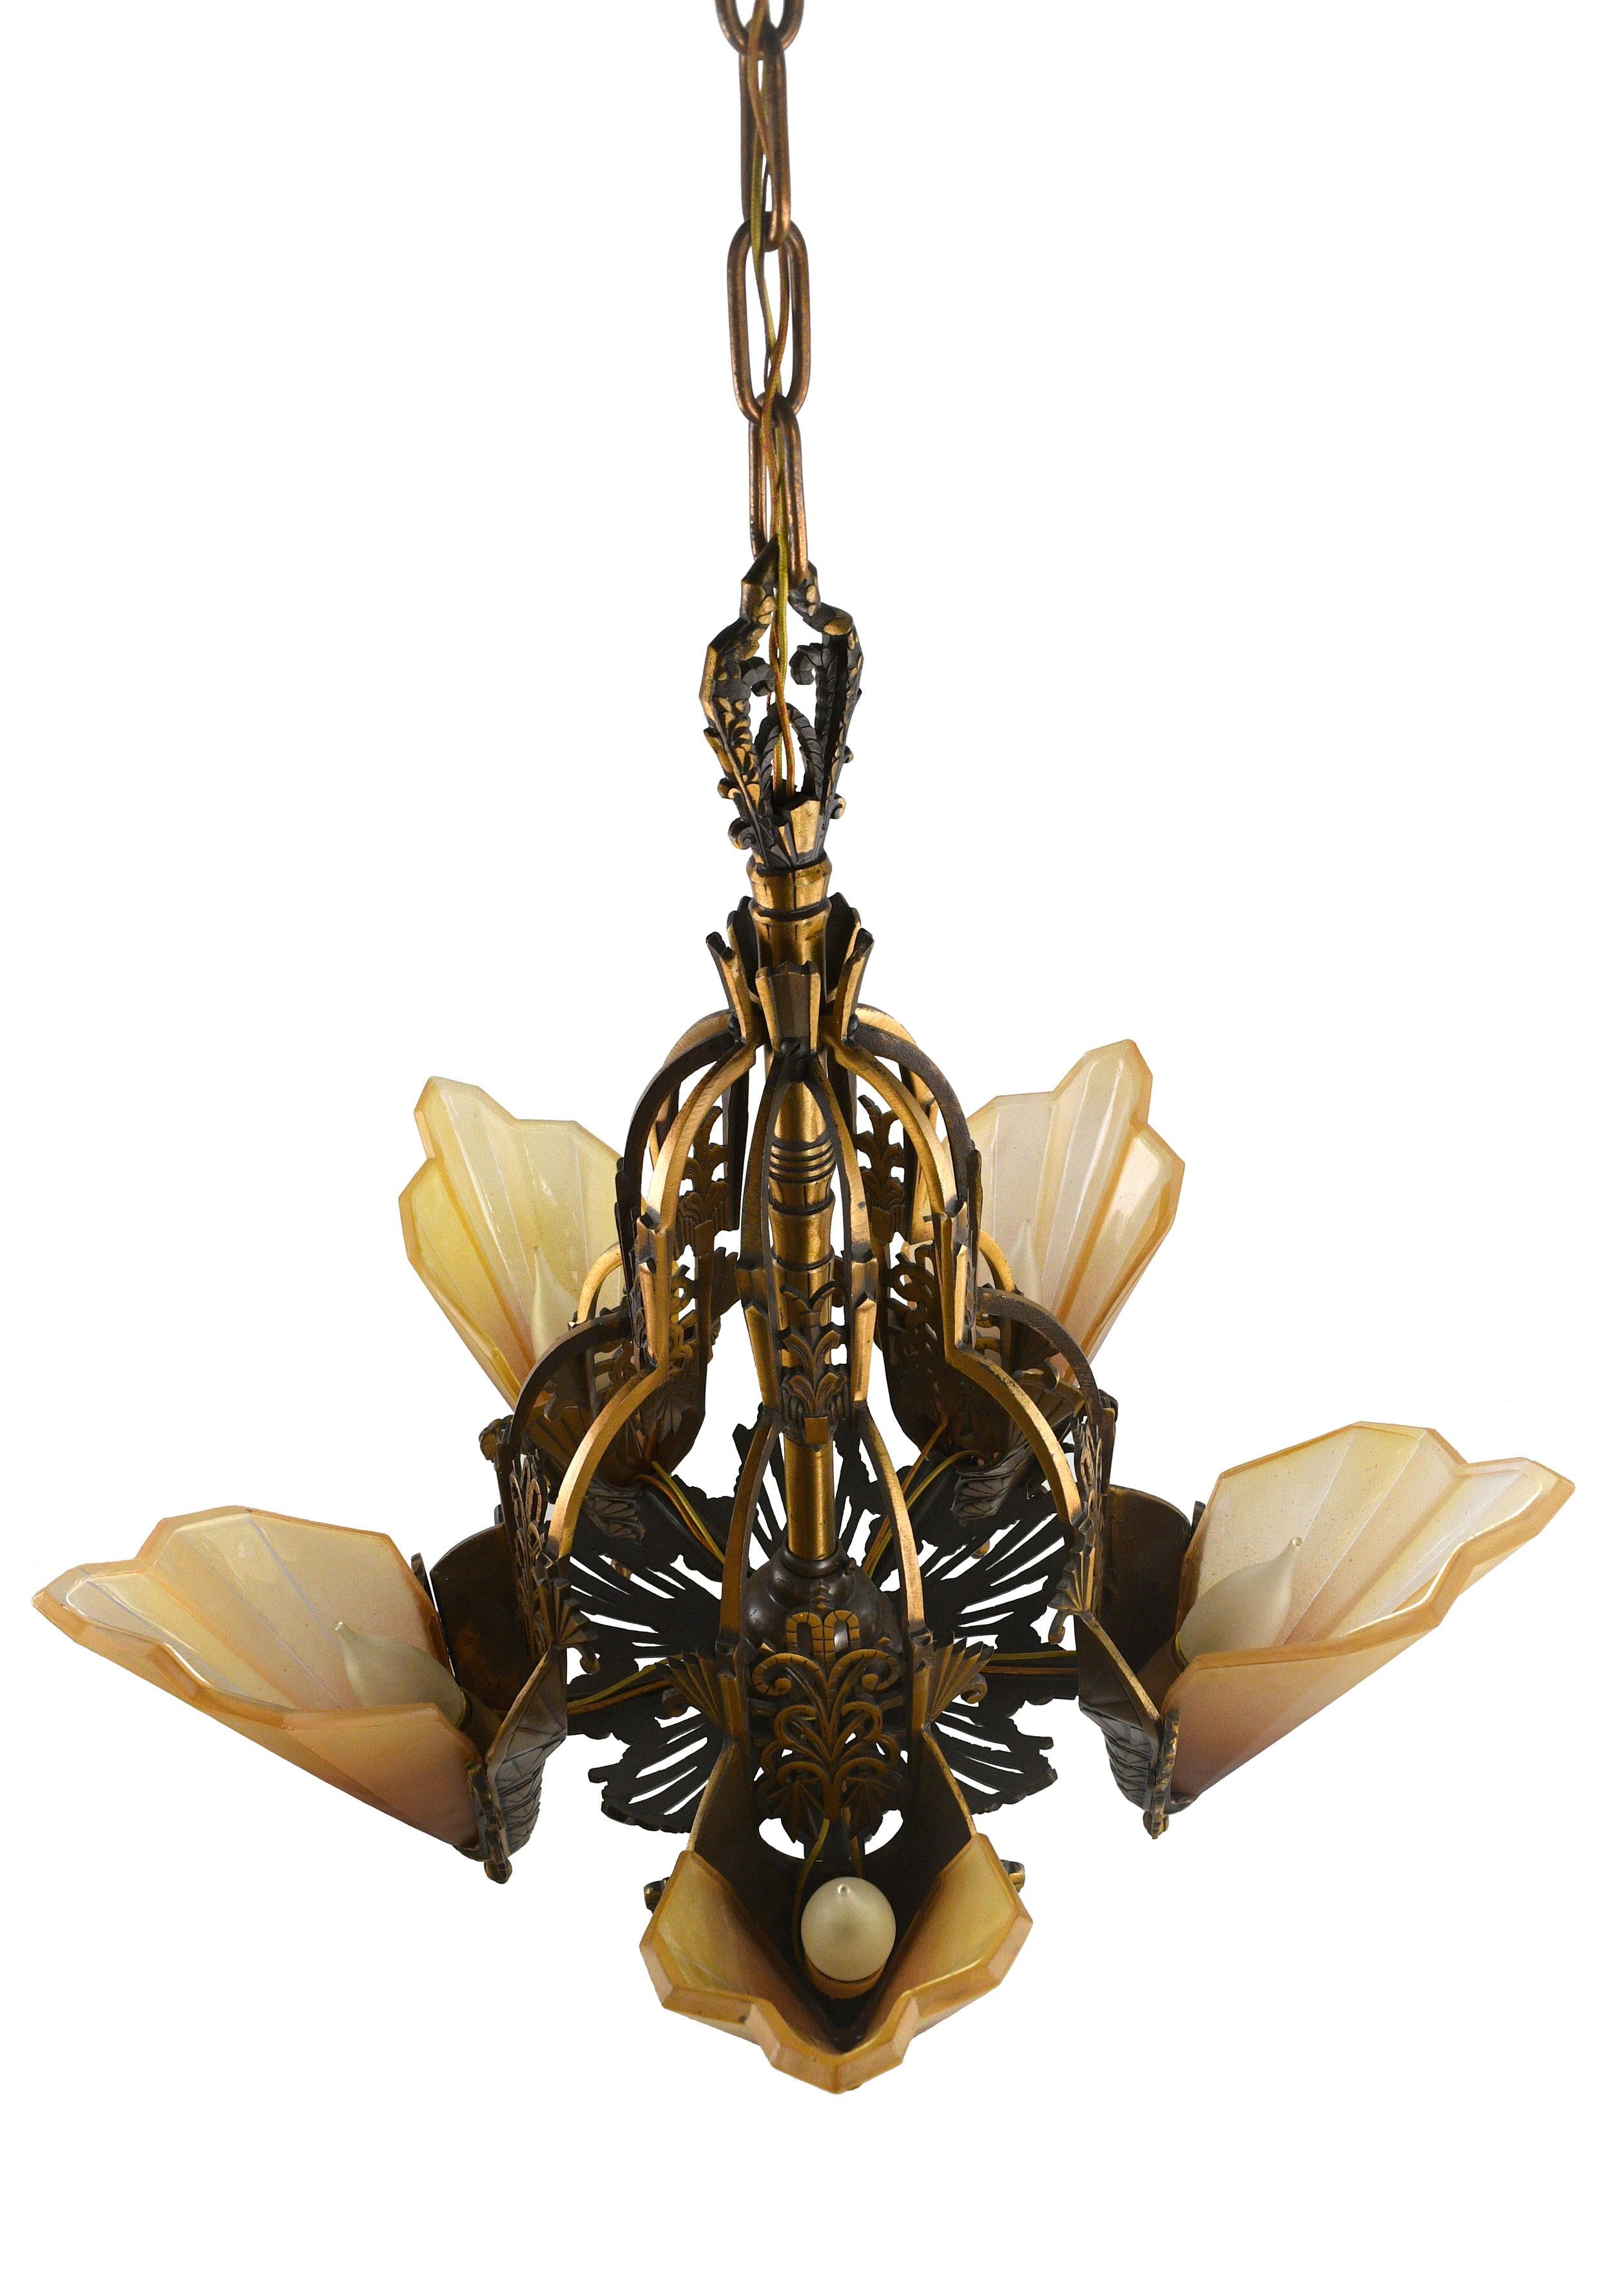 Intricately detailed 5 slip shade chandelier. This chandelier is made of lovely brass and features a geometric Art Deco design with a pleasant mix of sharp angles and curves.